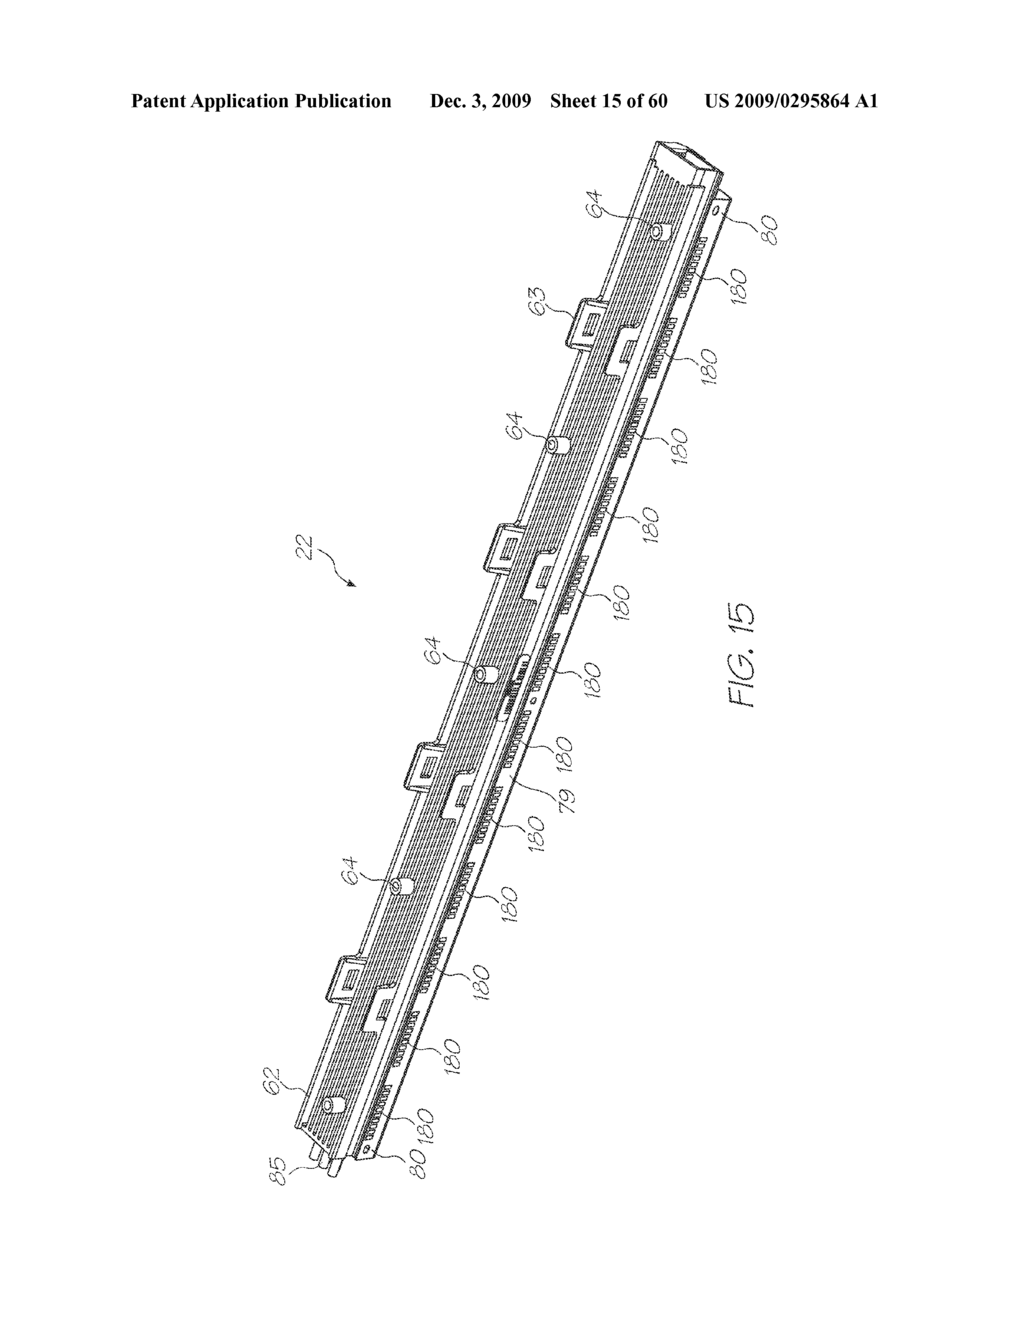 Printhead Assembly With Ink Supply To Nozzles Through Polymer Sealing Film - diagram, schematic, and image 16